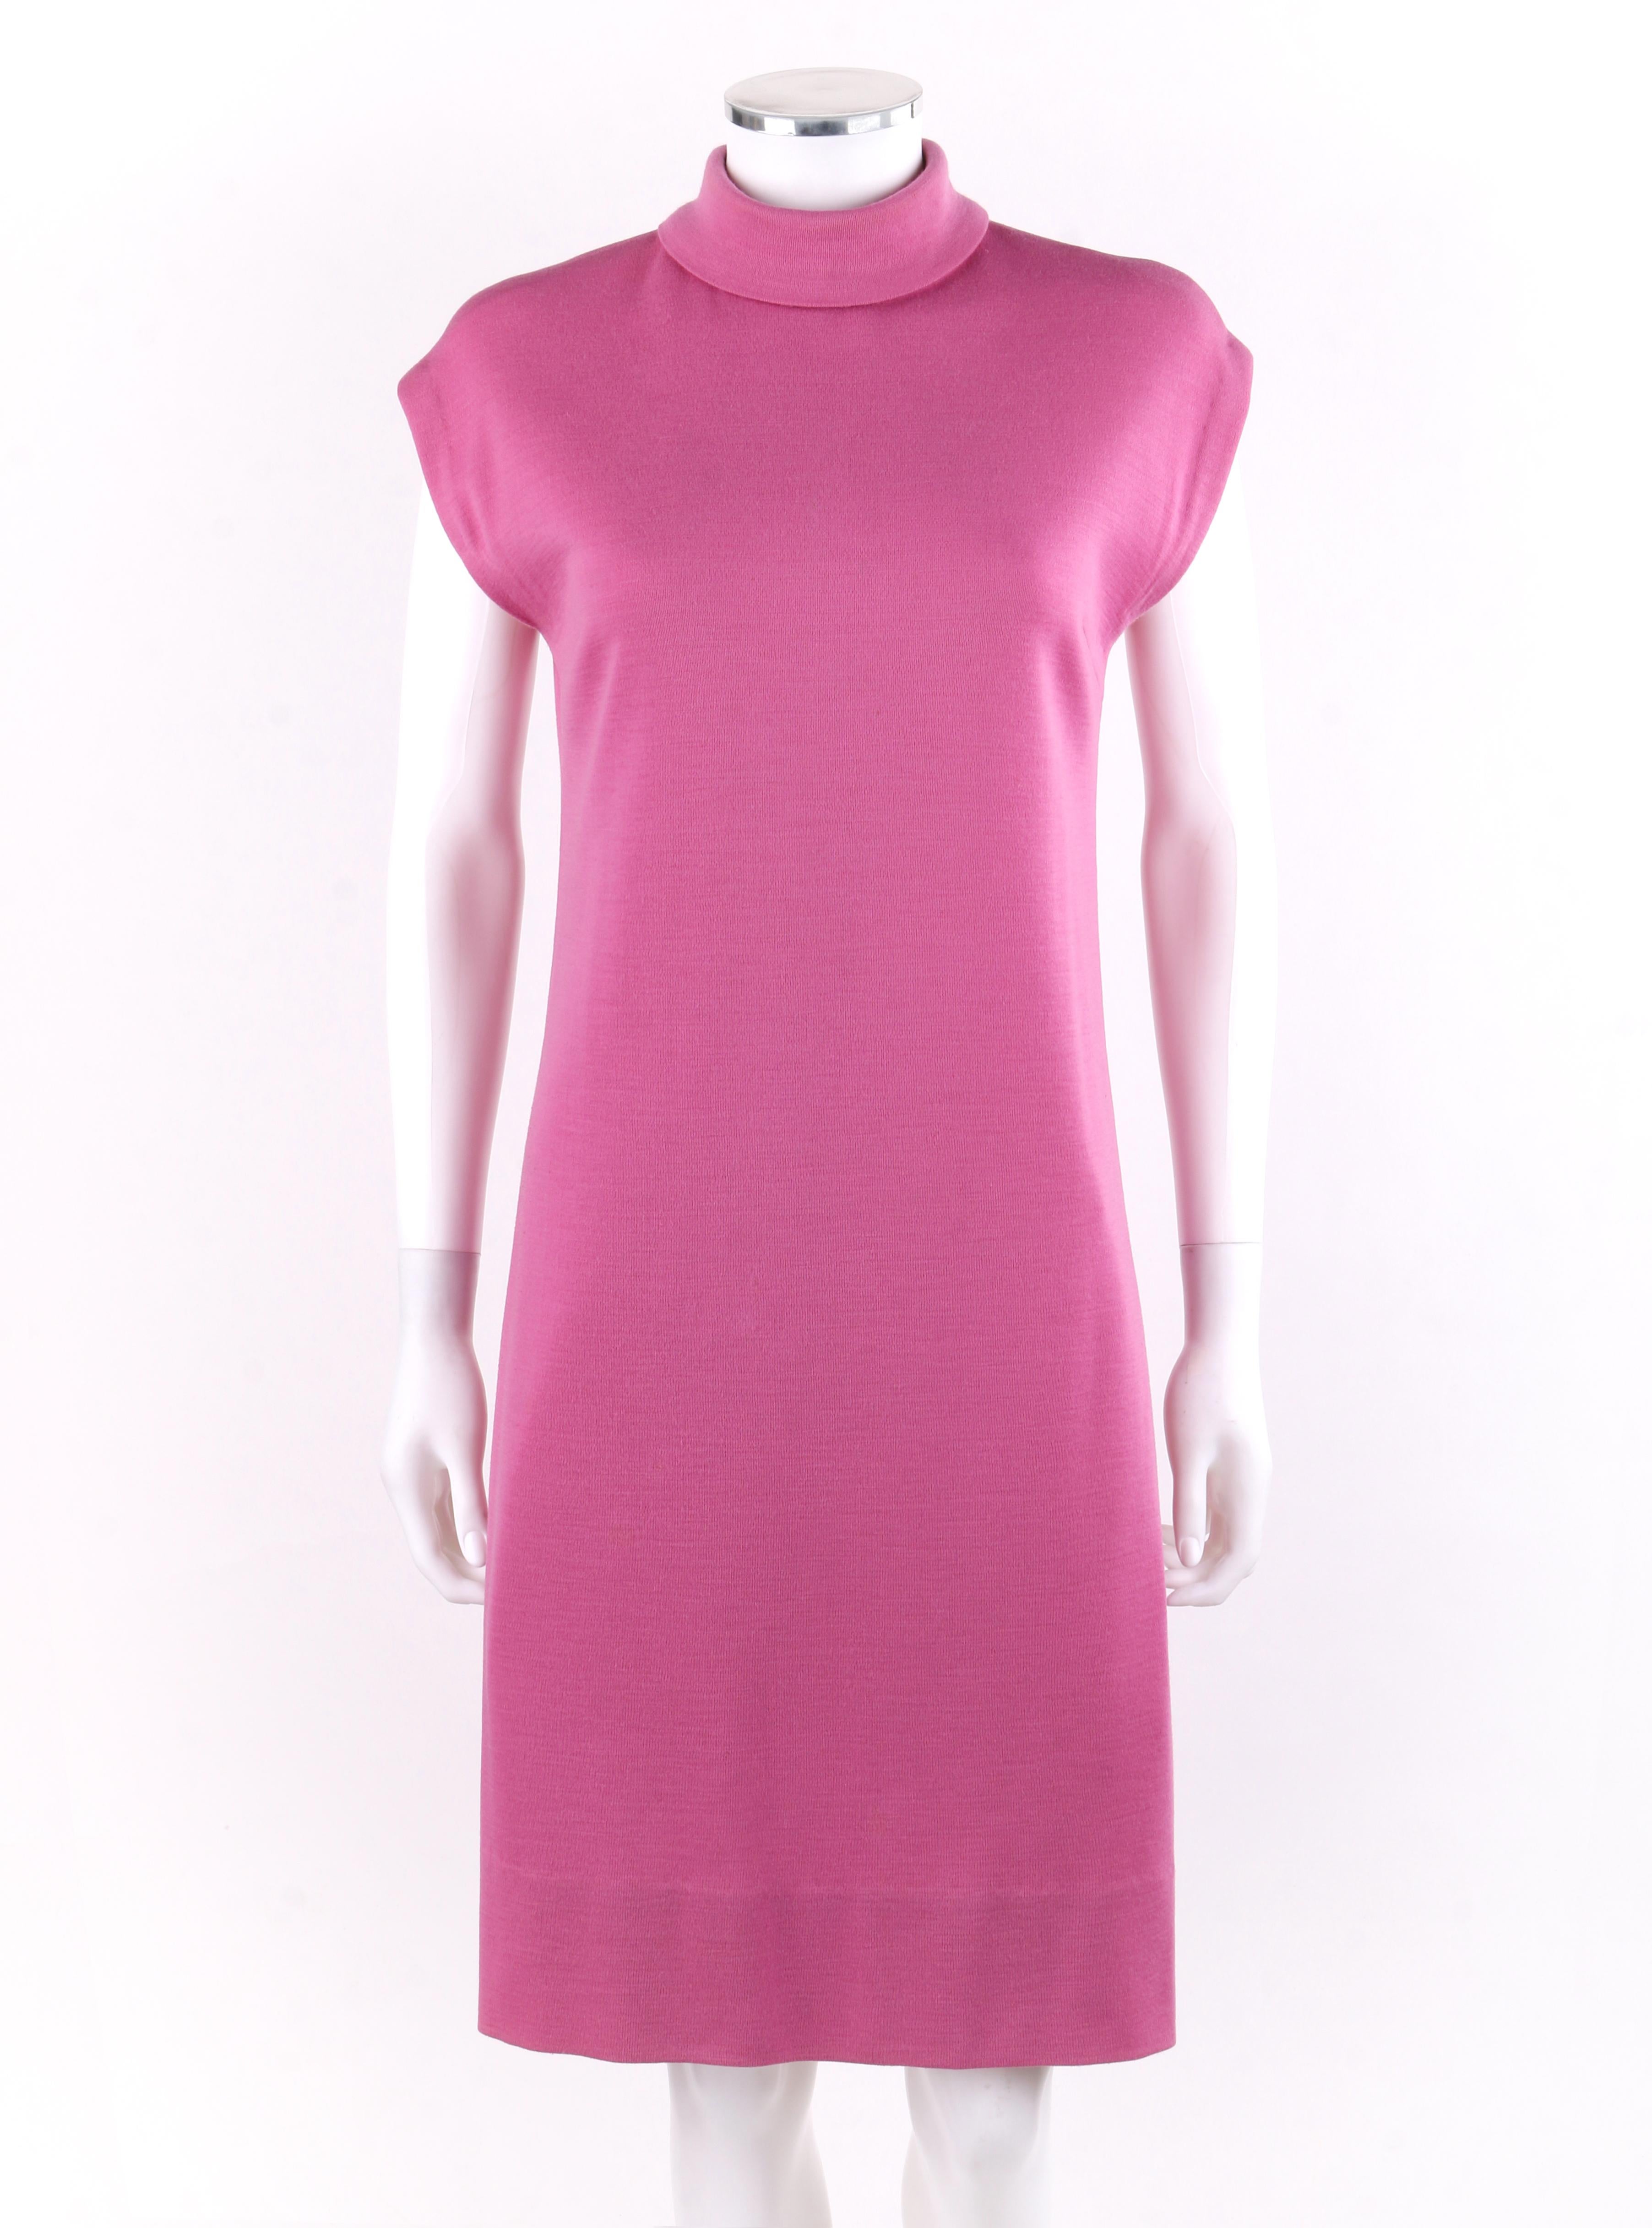 BONNIE CASHIN c.1960’s Pink Cap Sleeve High Neck Belted Shift Dress

Circa: 1960’s
Label(s): Sills Bonnie Cashin
Designer: Bonnie Cashin
Style: Shift dress with cap sleeves and folded high neck collar; thin ultrasuede belt
Color(s): Shades of